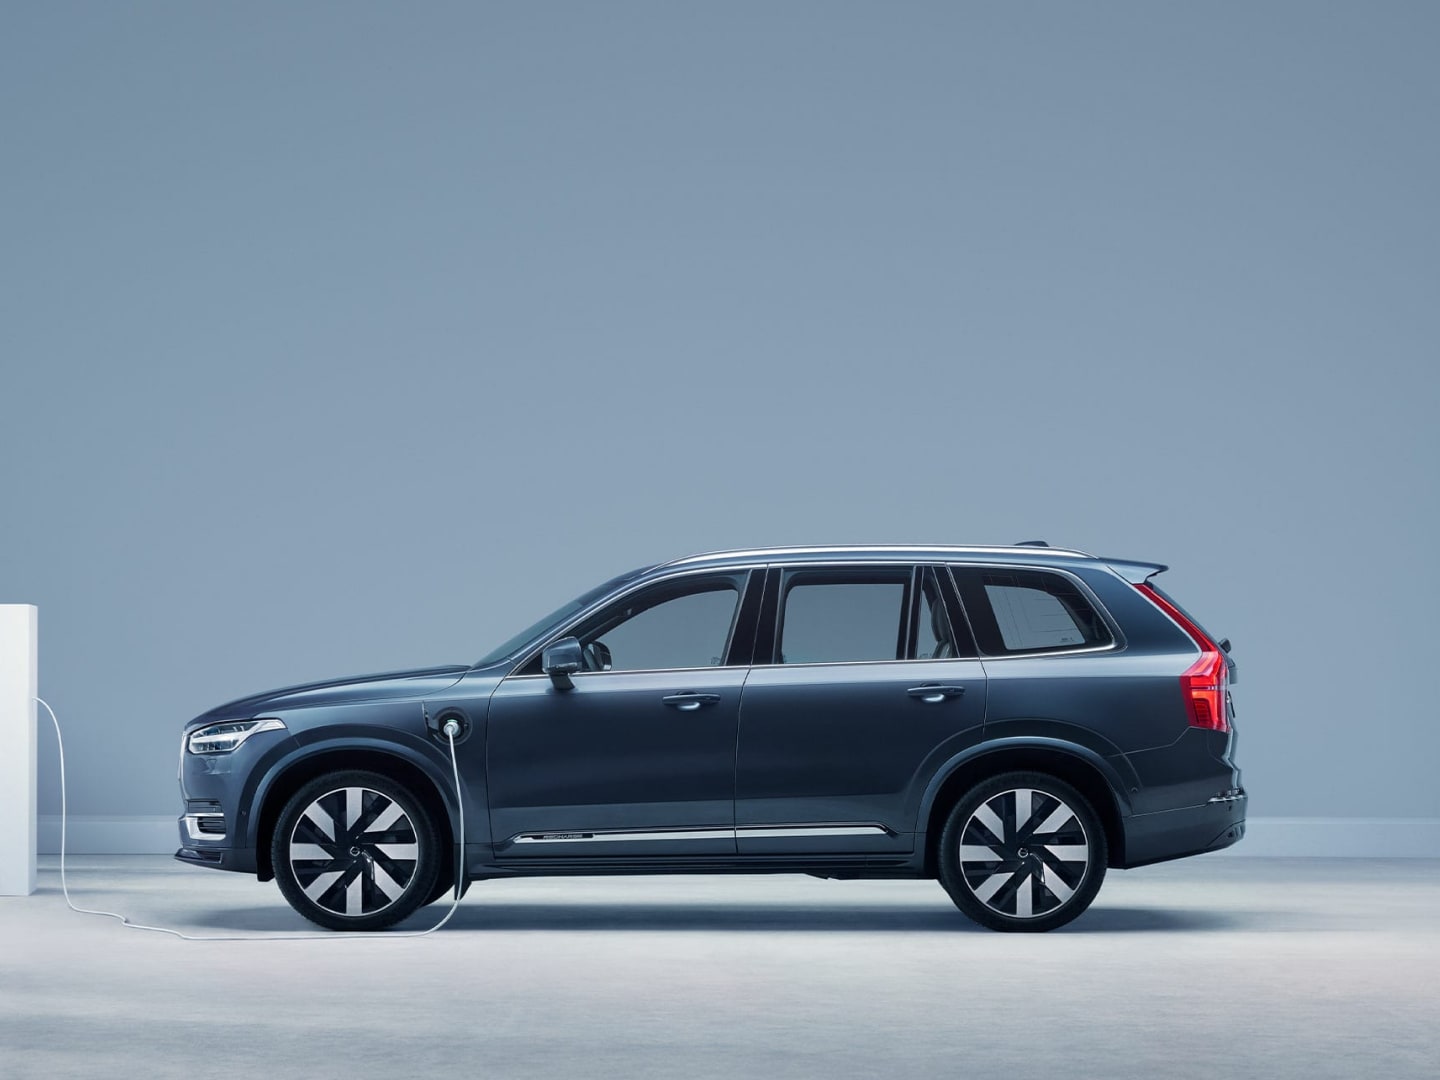 The side profile of a Volvo XC90 Recharge plug-in hybrid SUV.